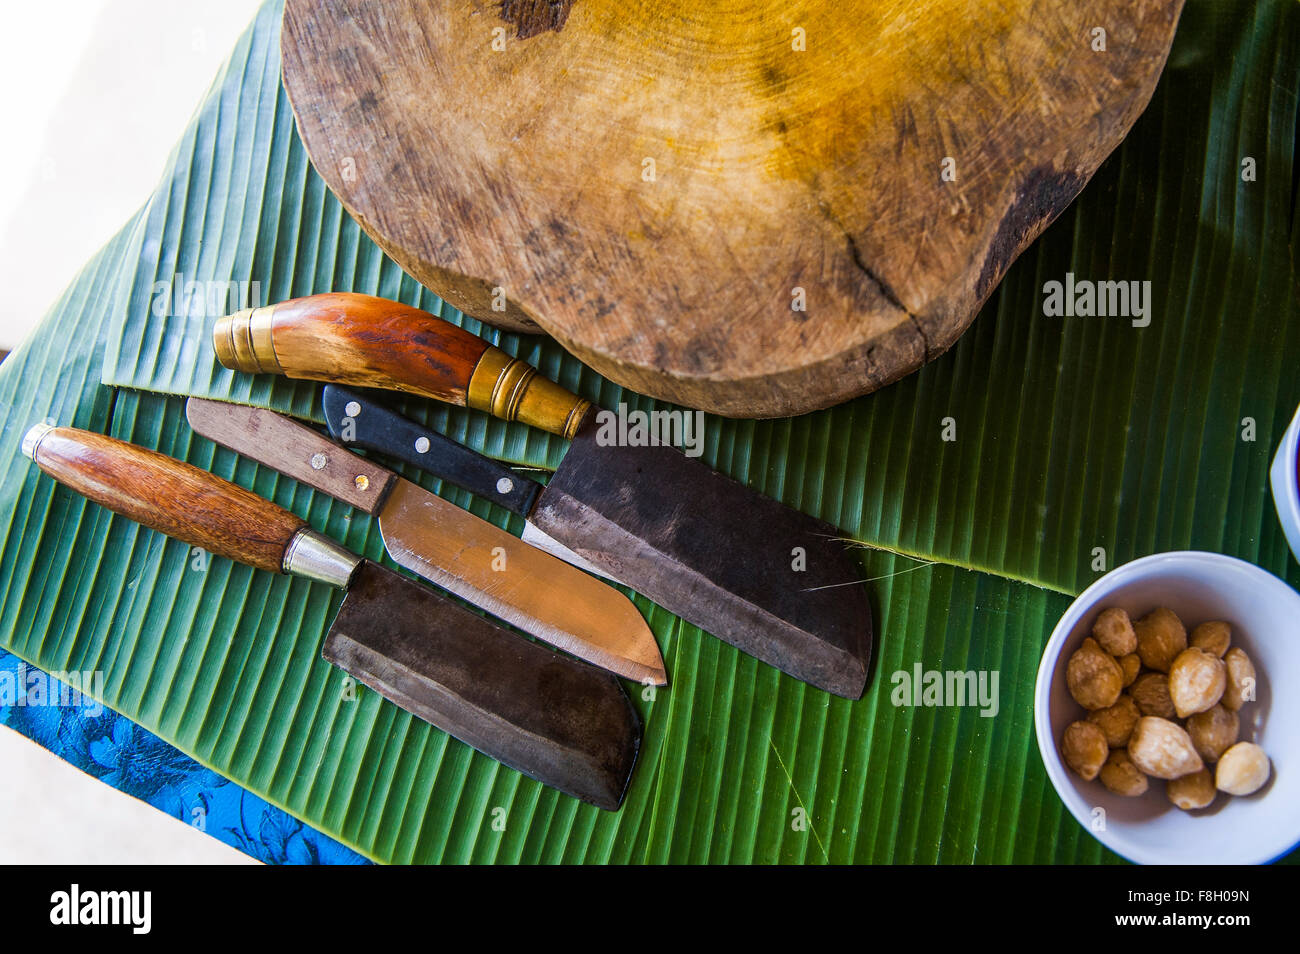 Knives, cutting board and banana leaves on counter Stock Photo